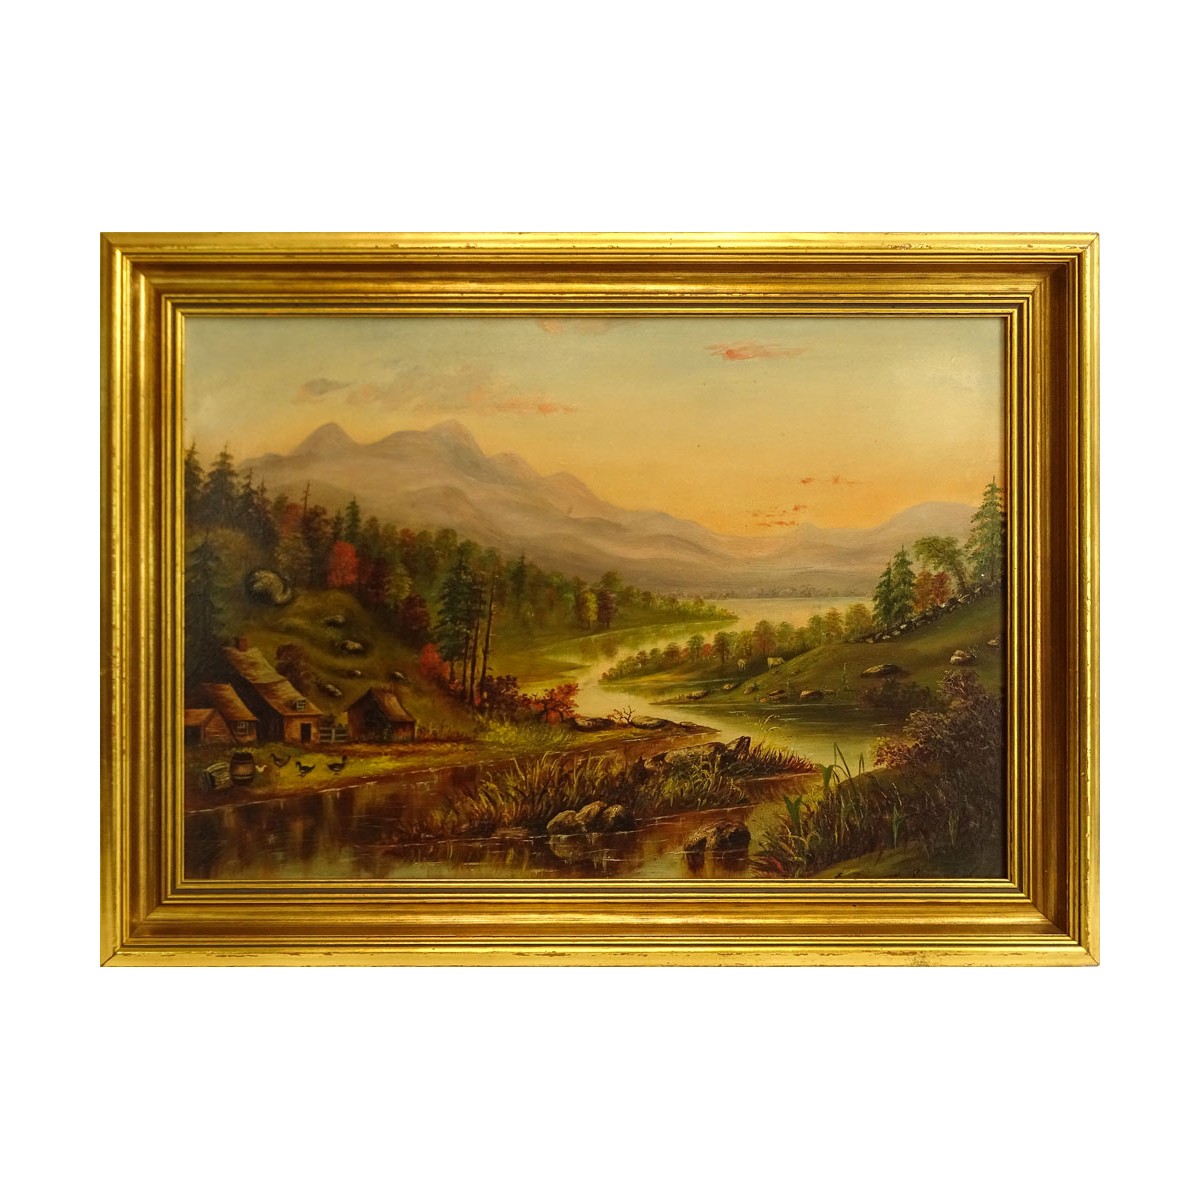 19th Century Oil on Masonite "River House" Signed, titled (Possibly in Span